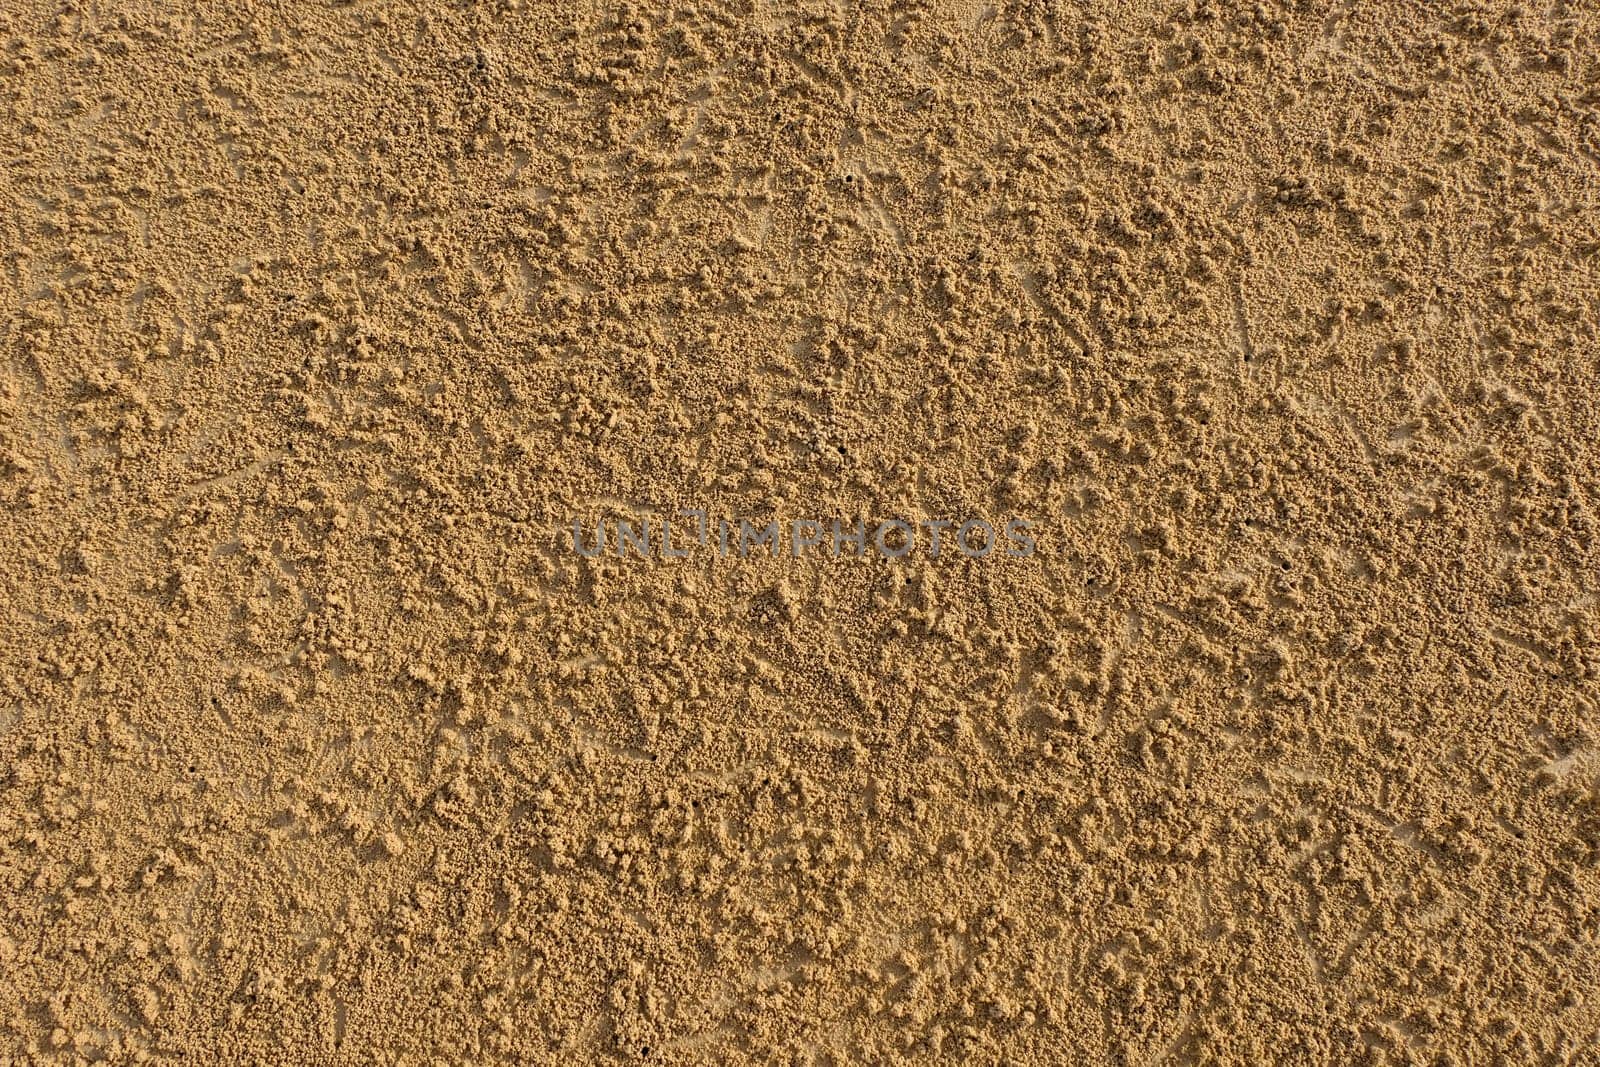 details of sand texture on the beach.